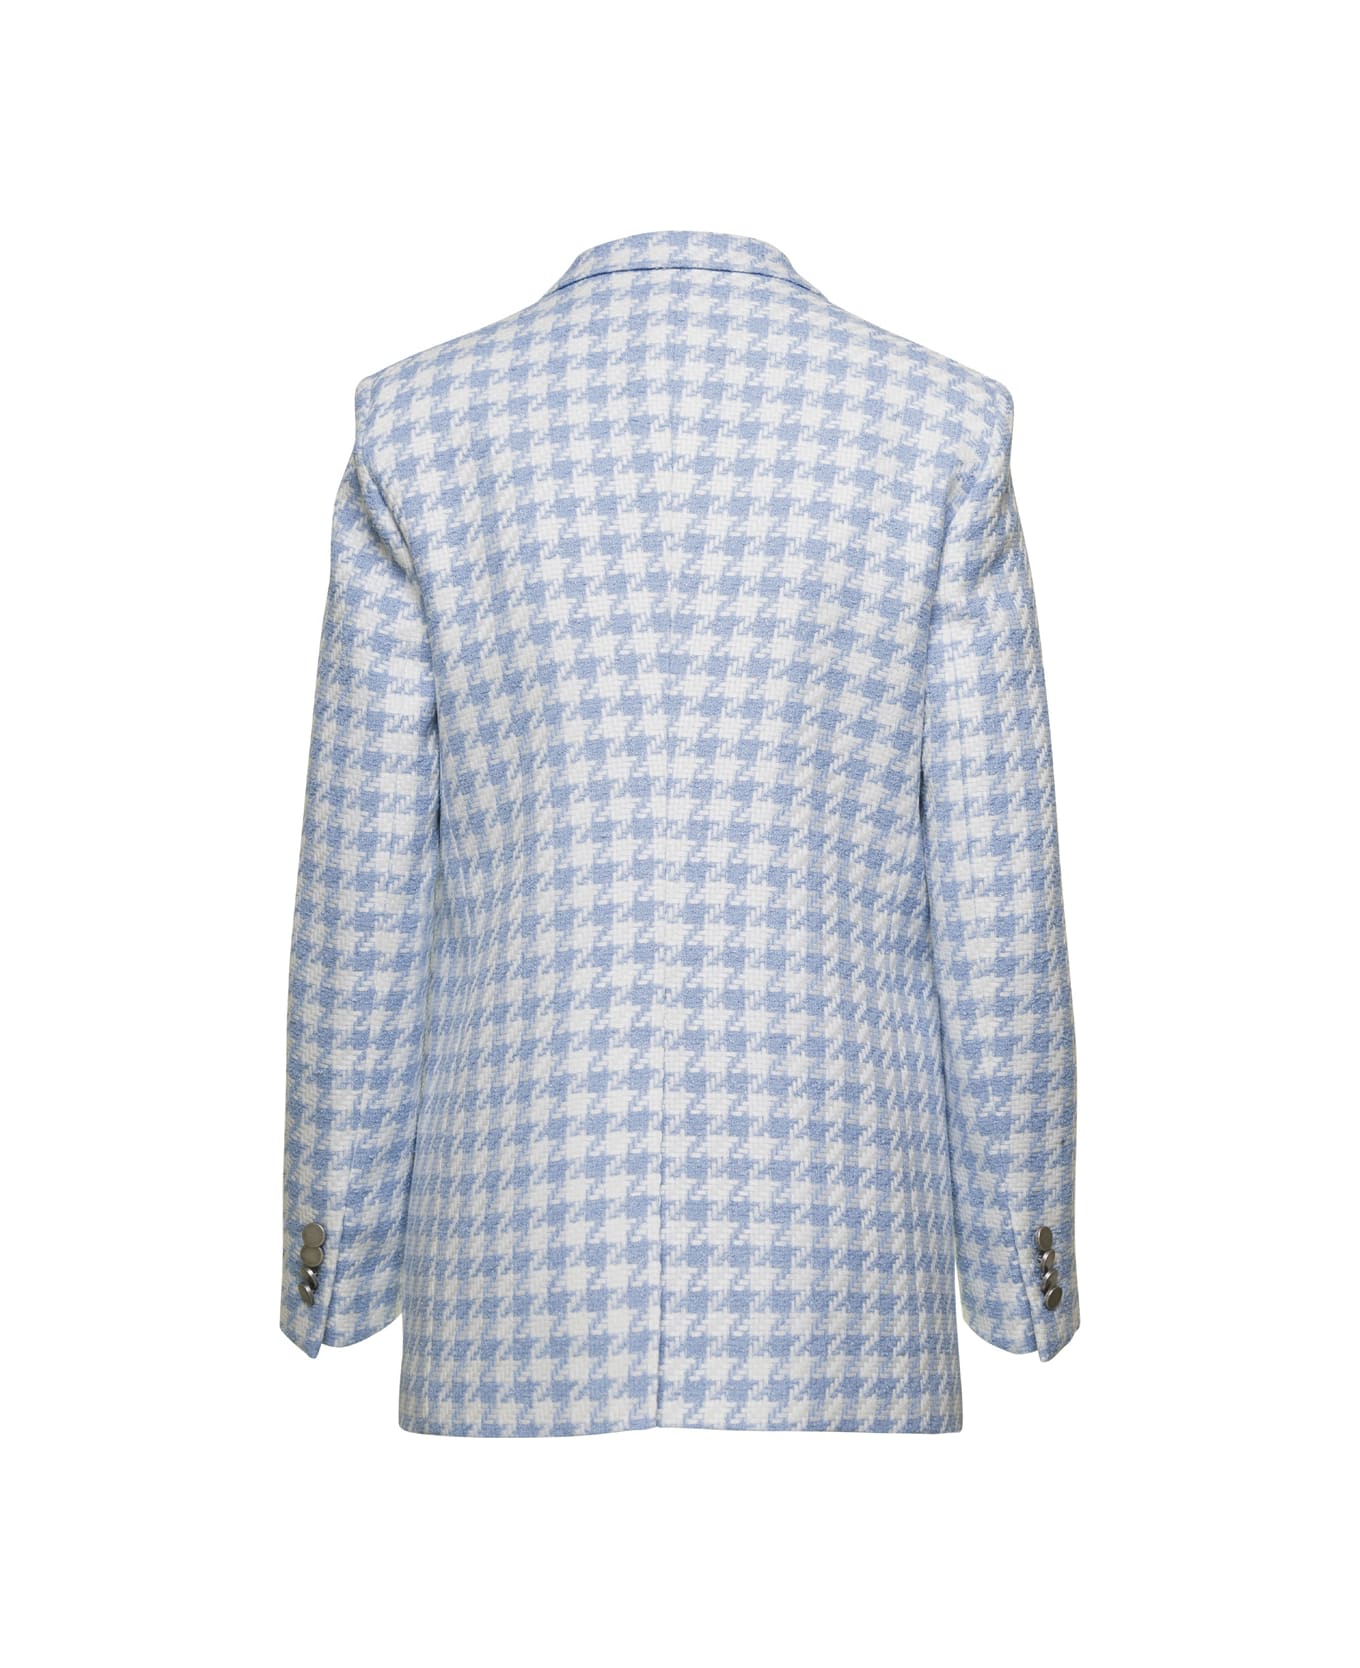 Tagliatore Light Blue Houndstooth Double-breasted Blazer In Linen Blend Woman - Blu